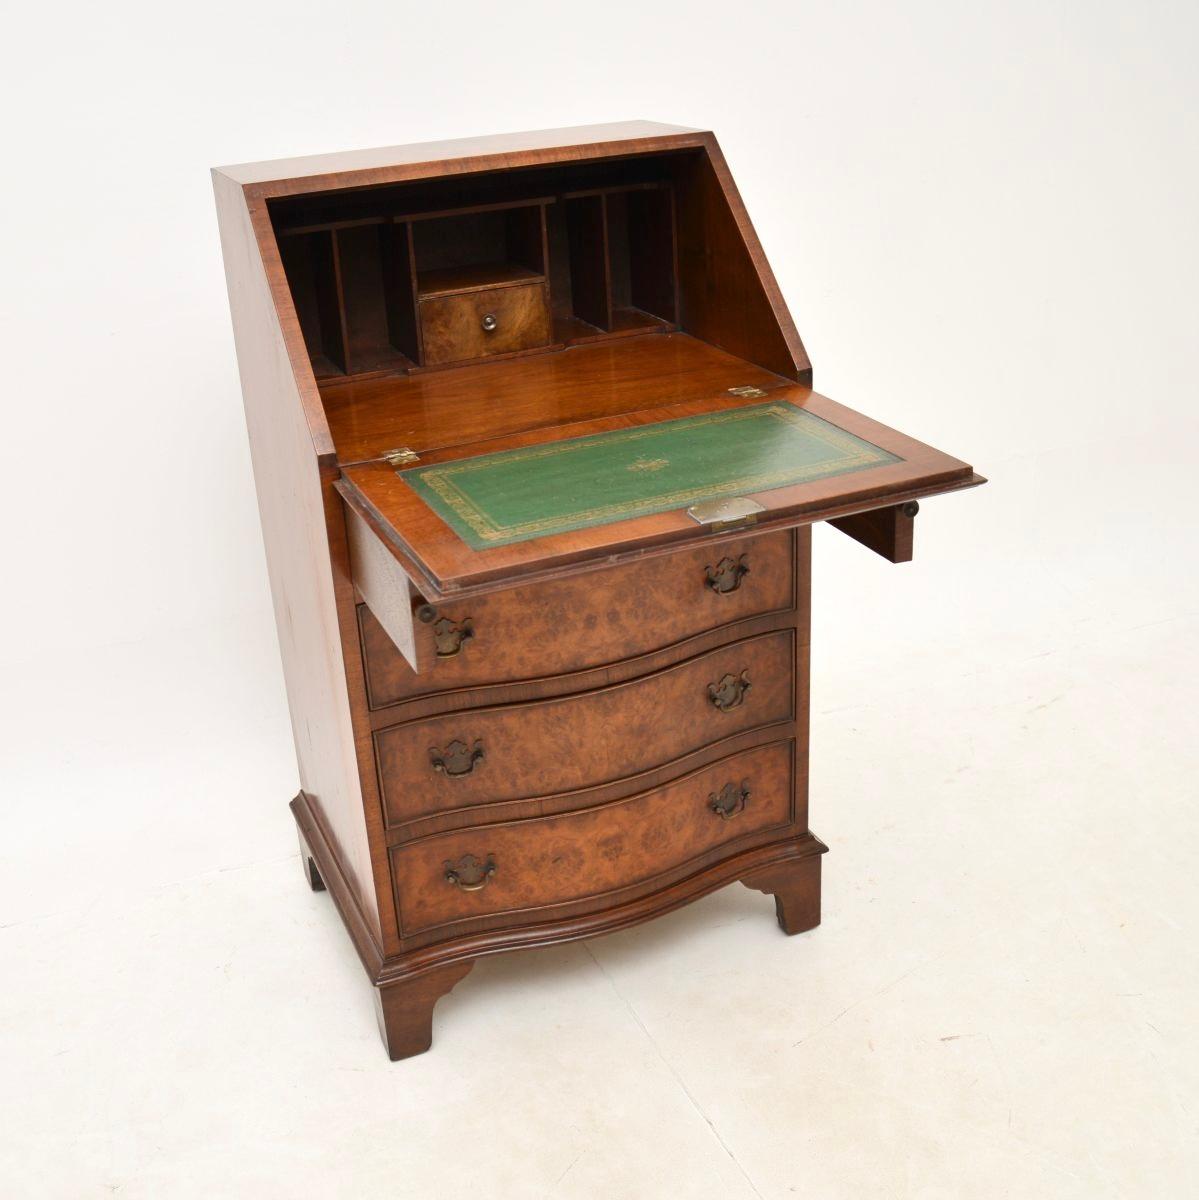 A superb antique Georgian style burr walnut bureau. This was made in England, it dates from around the 1950’s.

The quality is outstanding, this is a lovely slim size, with lots of work space and storage space in the drawers below. The burr walnut